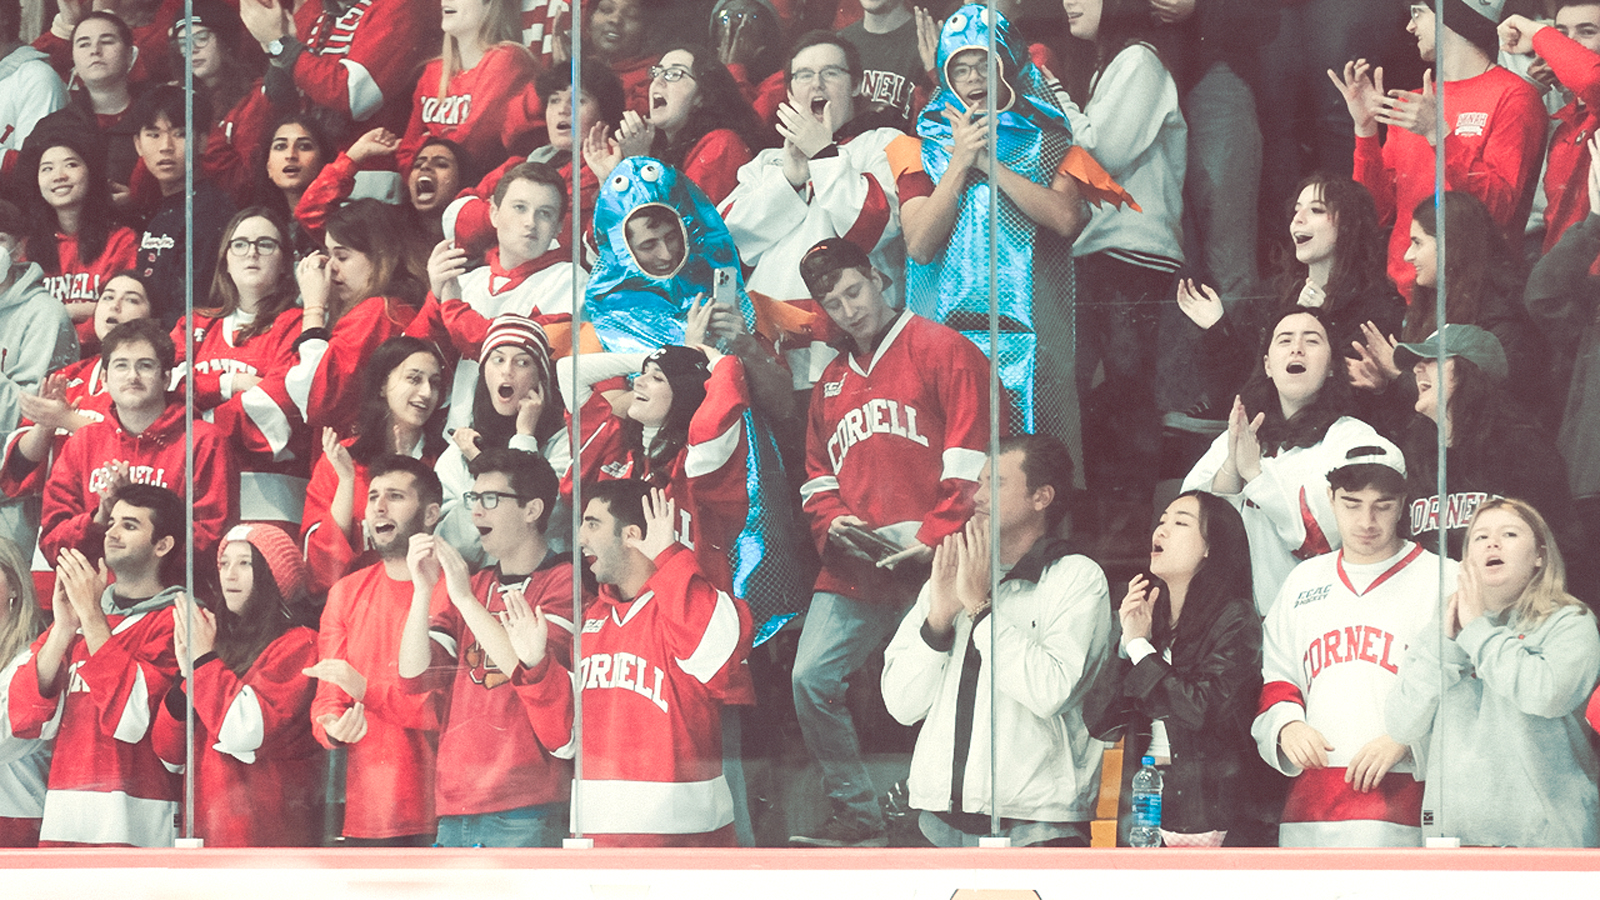 A crowd at a Cornell University hockey team featuring students wearing red jerseys and two students dressed in fish costumes.